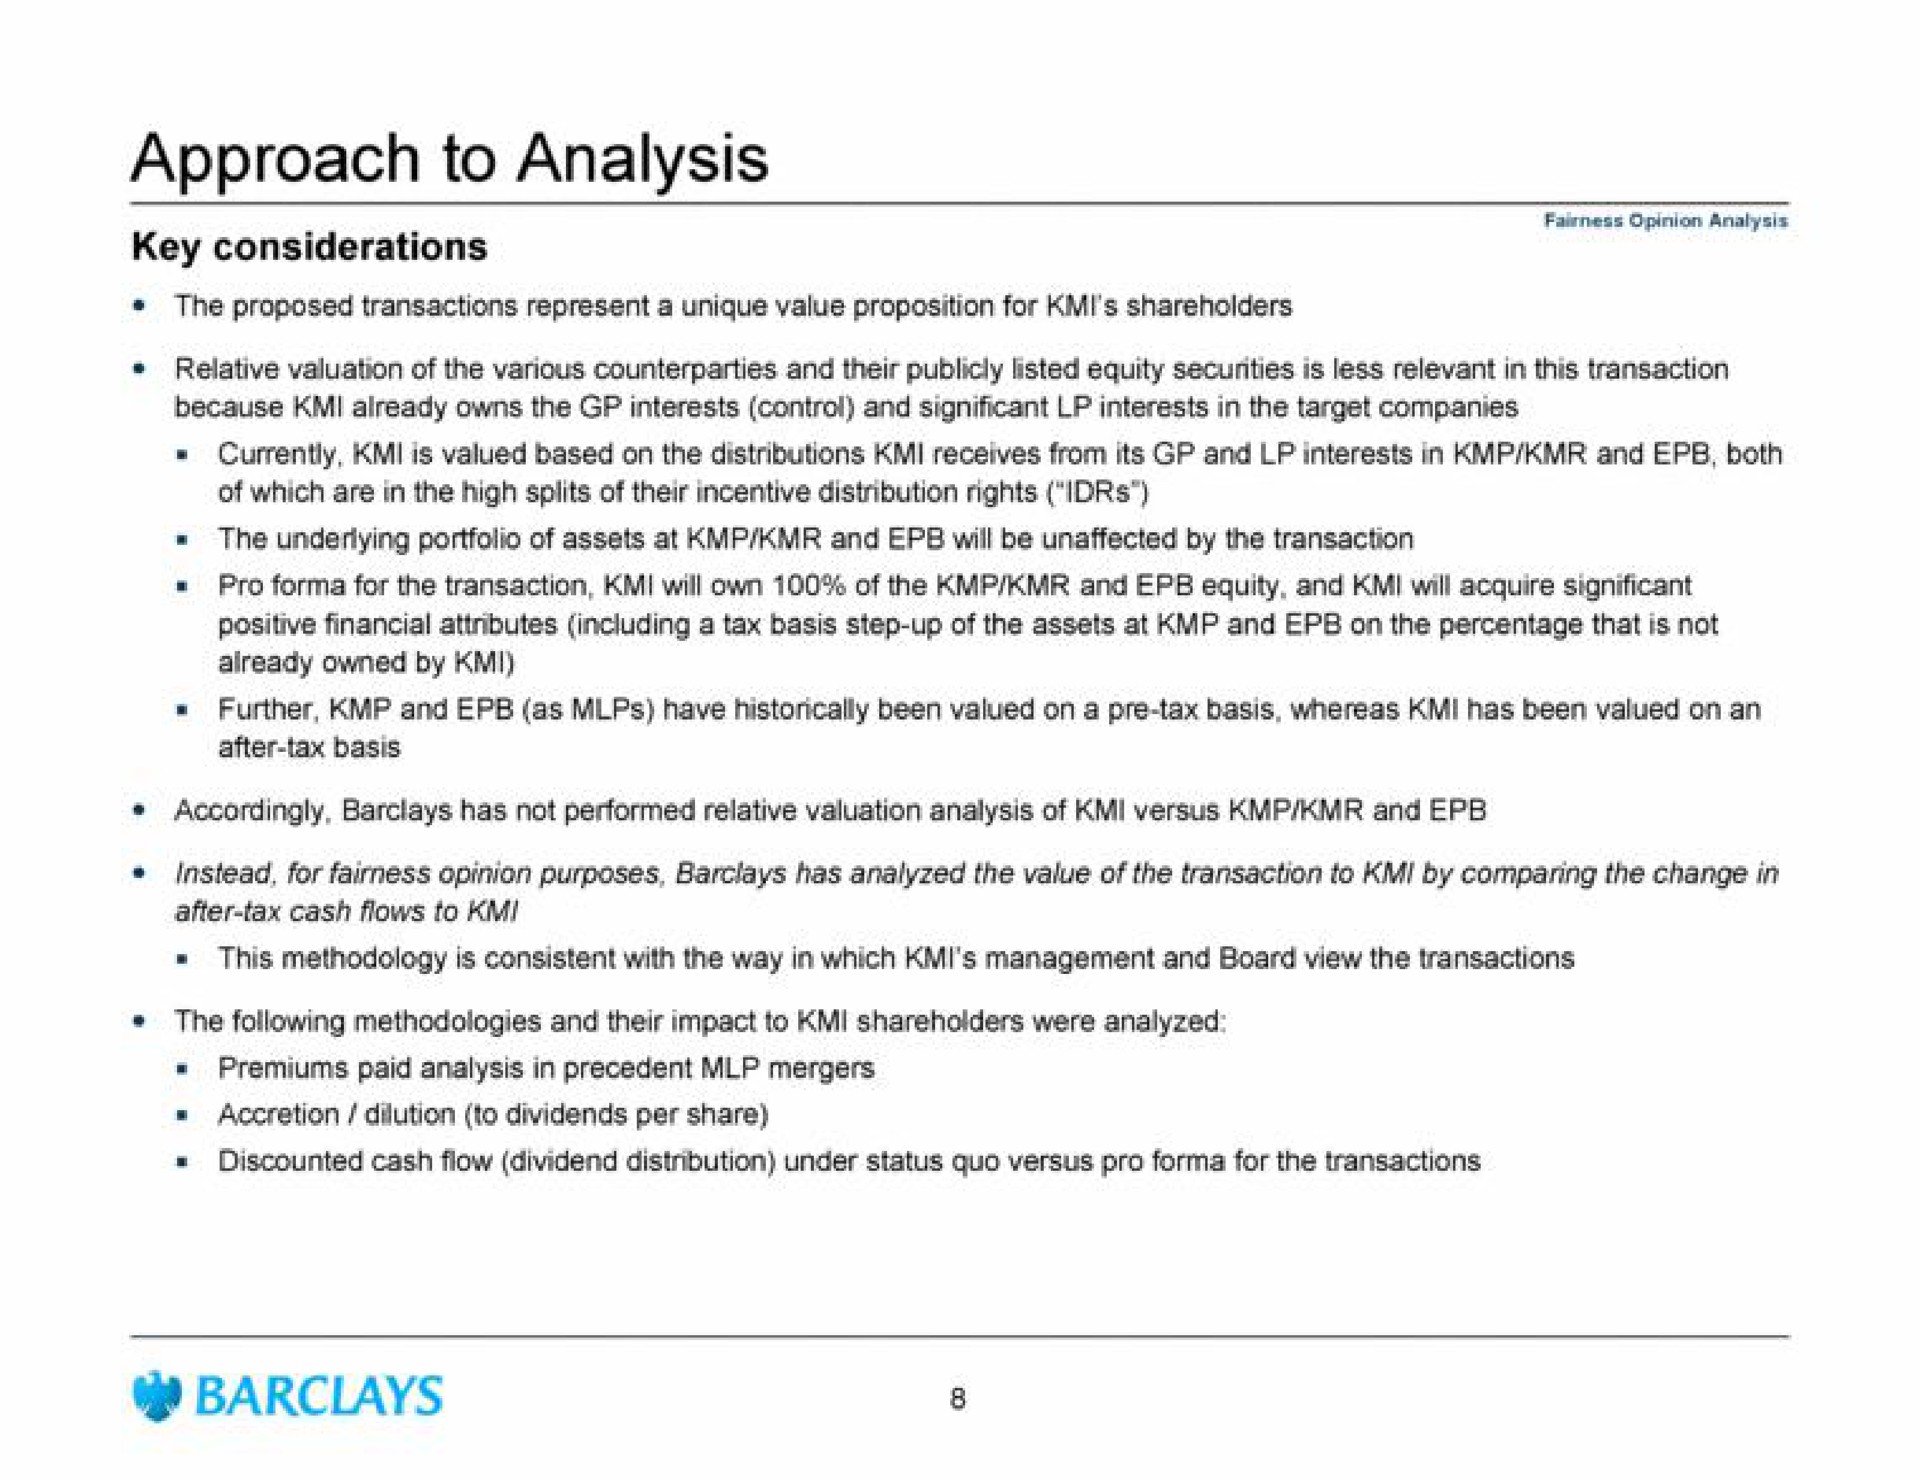 approach to analysis key considerations a | Barclays